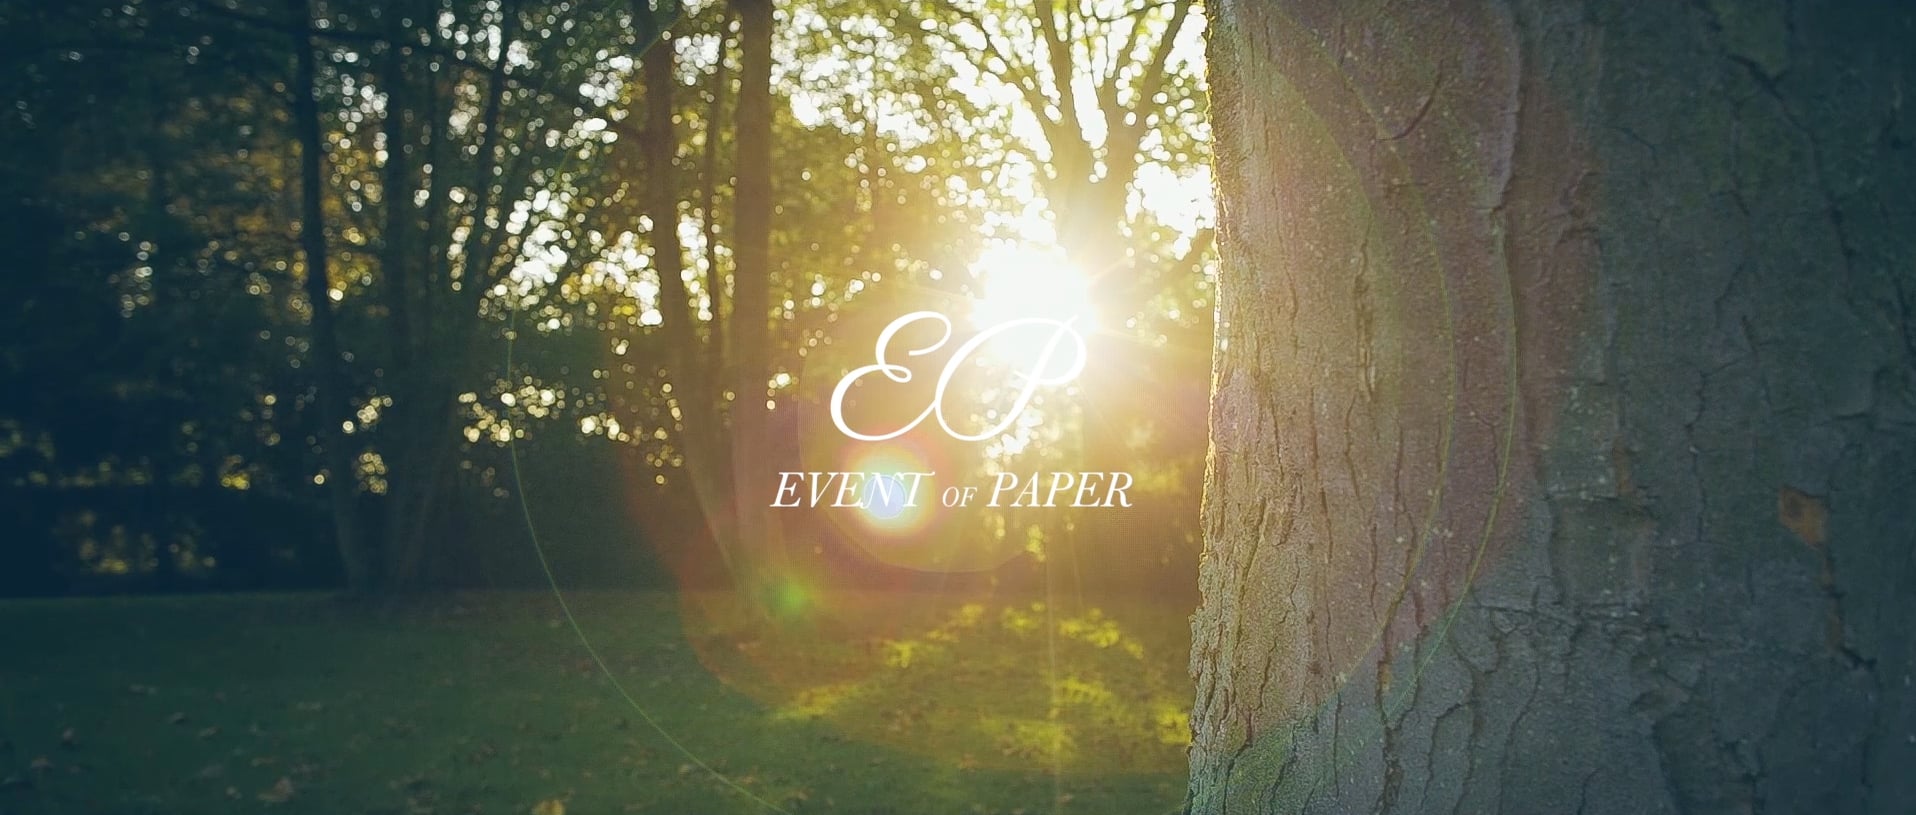 Event of paper